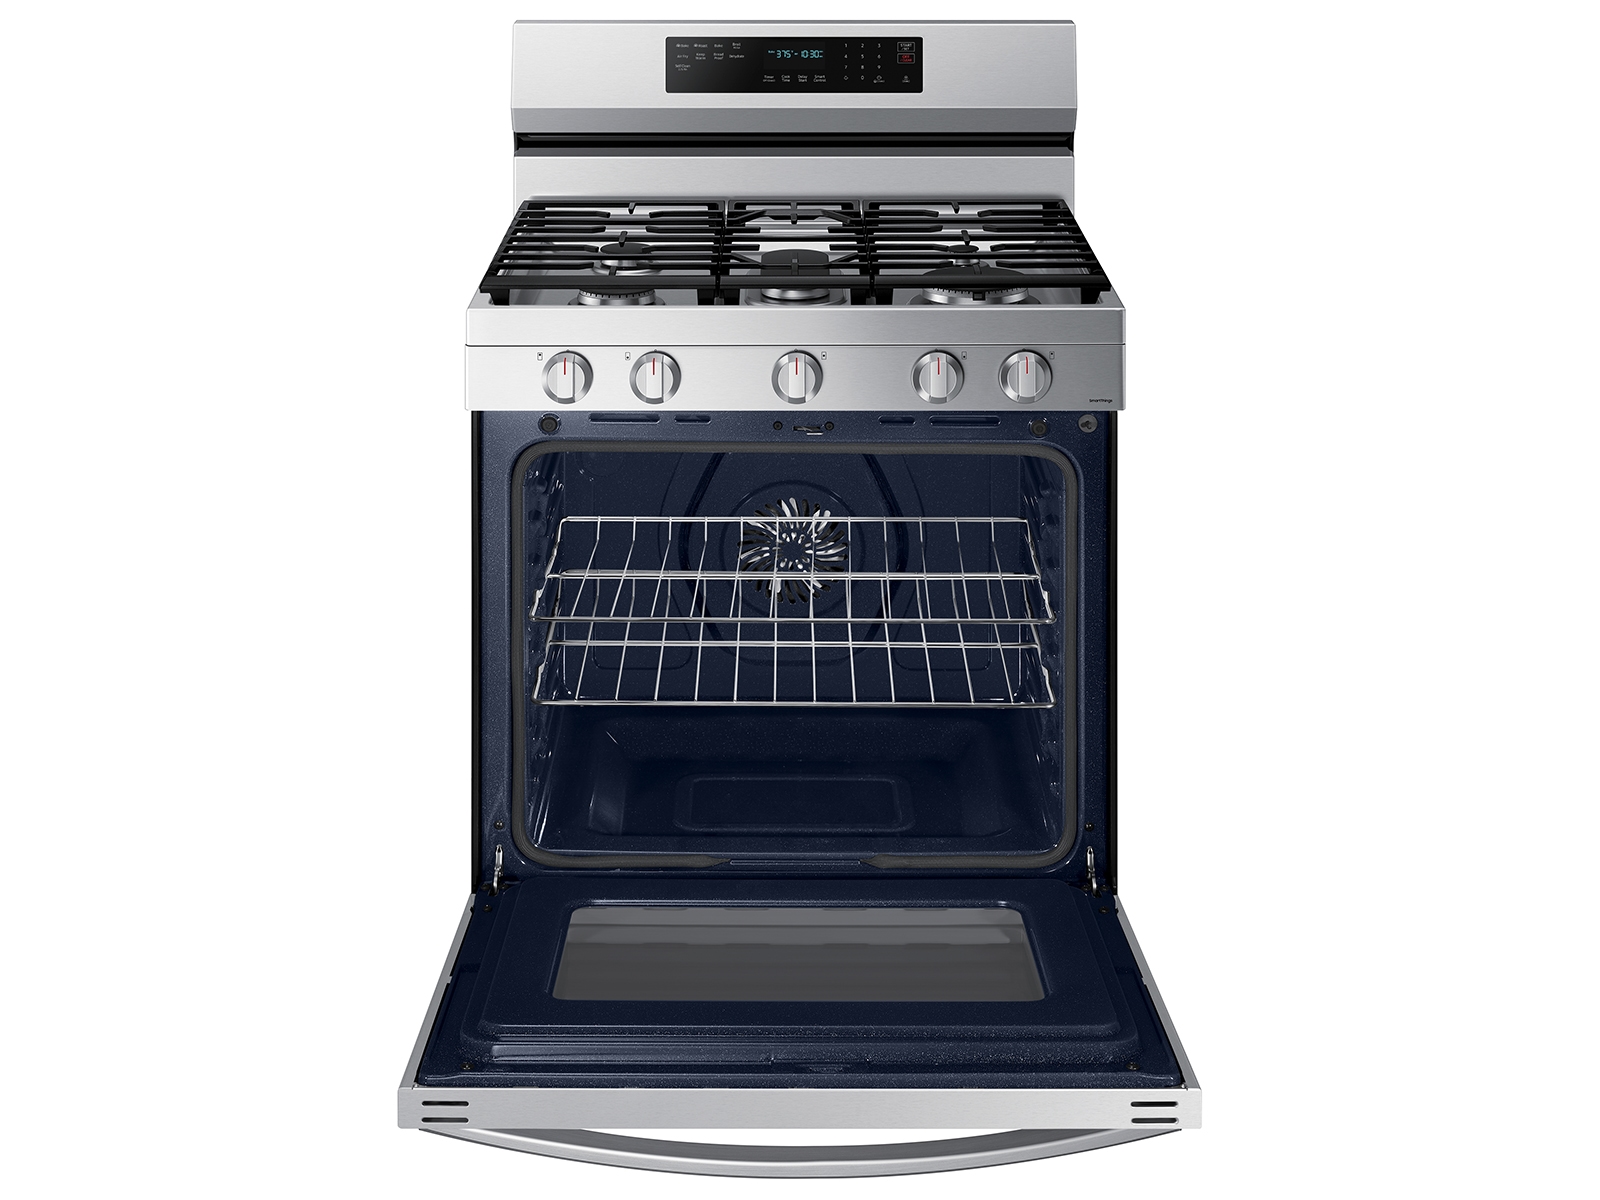 Thumbnail image of 6.0 cu. ft. Smart Freestanding Gas Range with No-Preheat Air Fry, Convection+ &amp; Stainless Cooktop in Stainless Steel